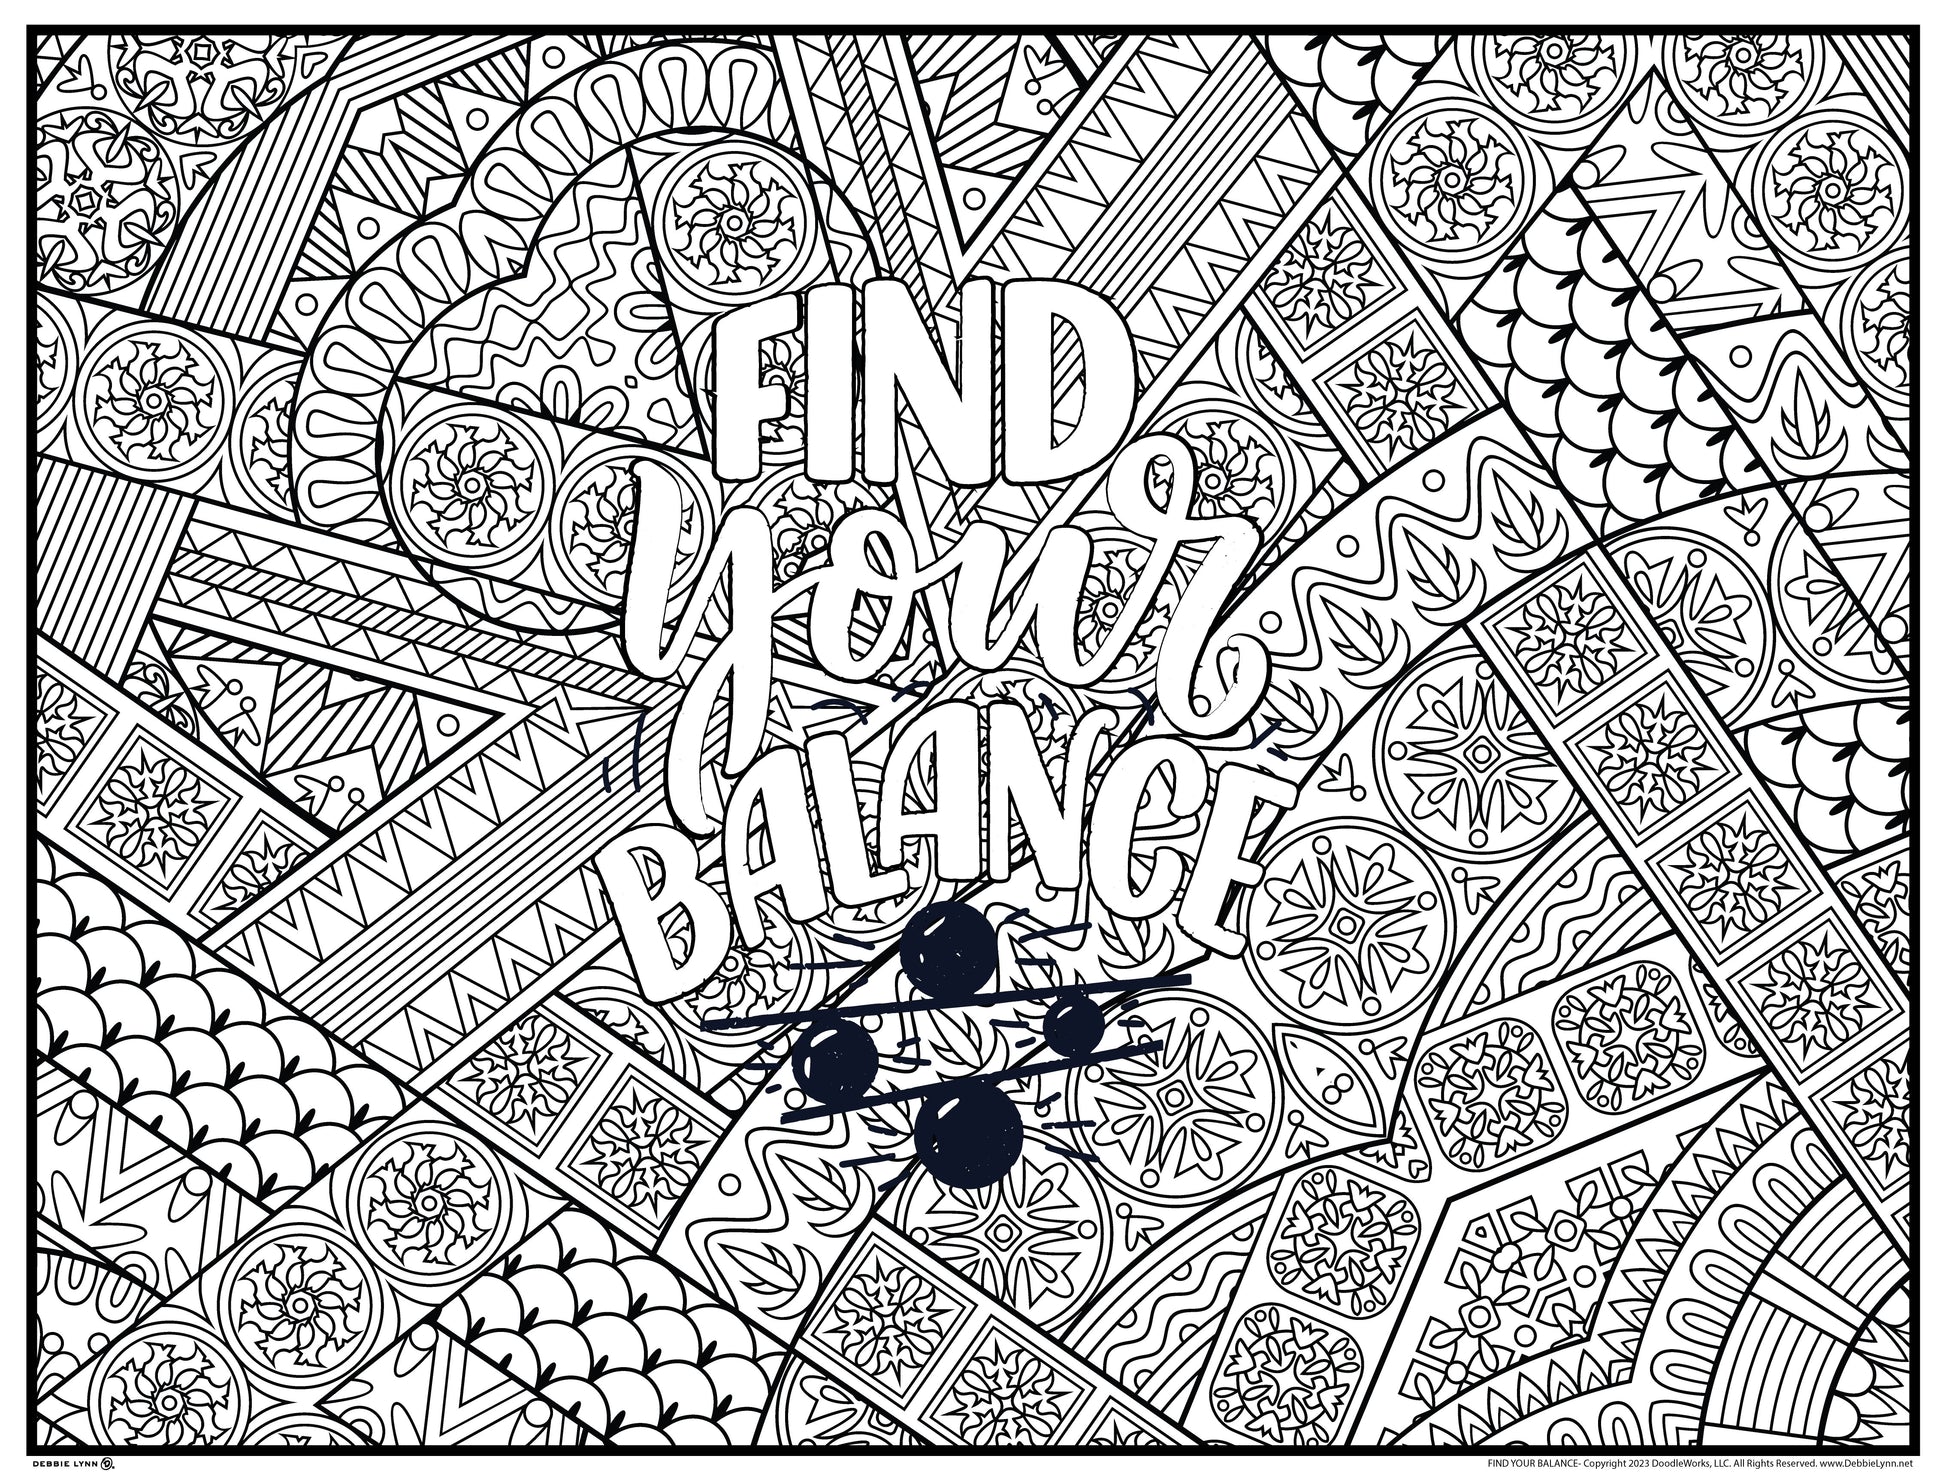 Find Your Balance Giant Coloring Poster